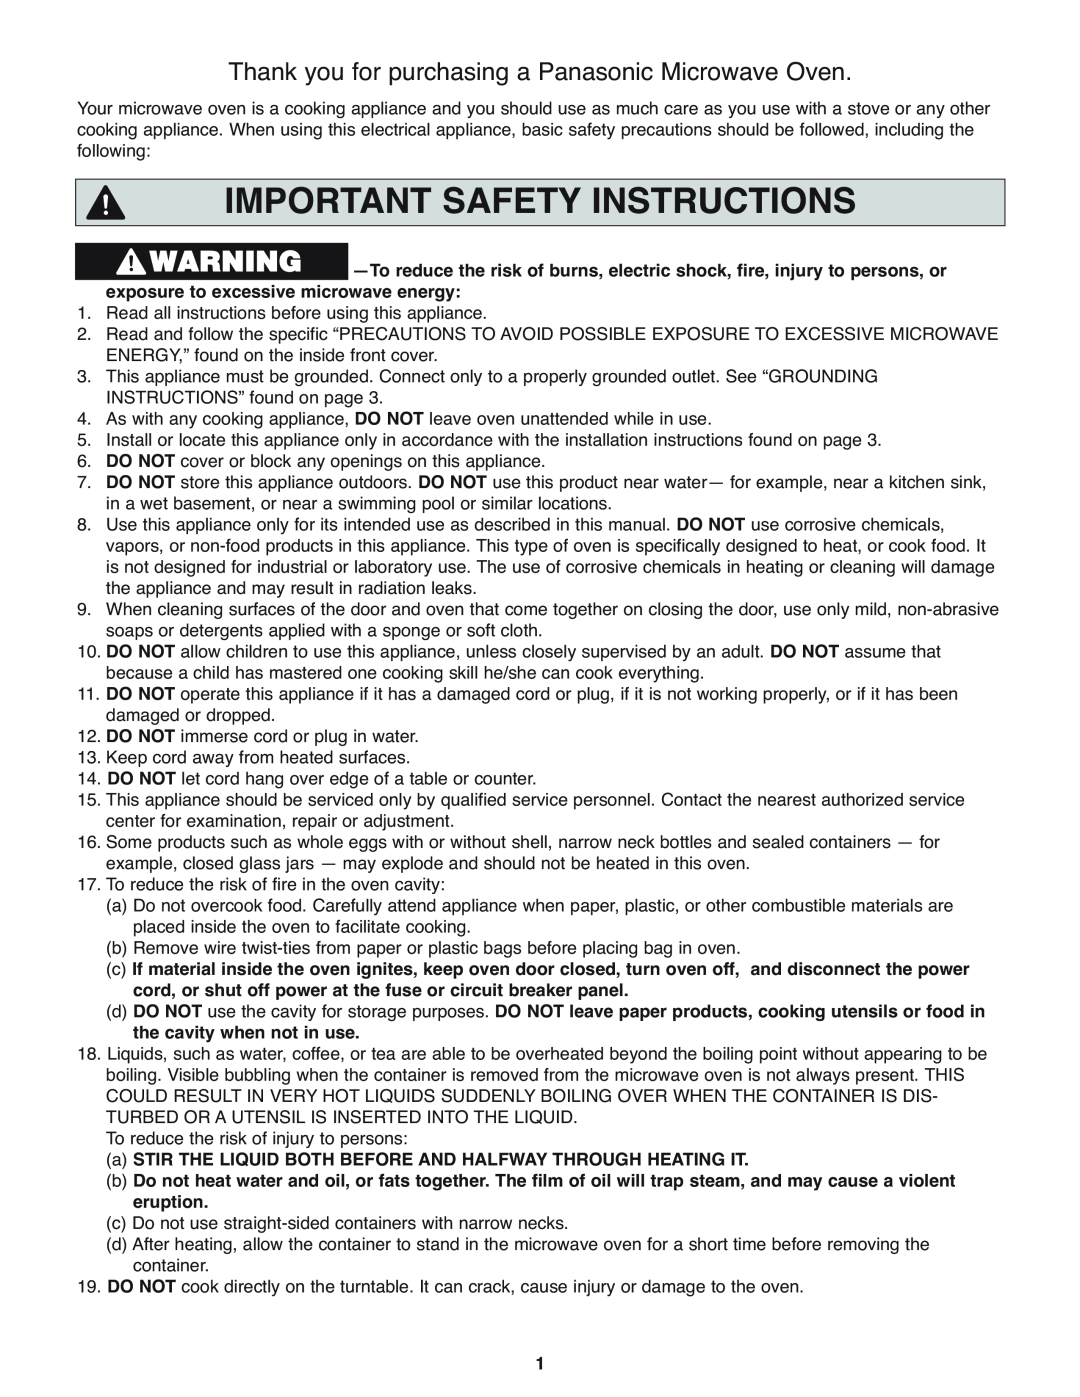 Panasonic NN-H275 operating instructions Important Safety Instructions, Thank you for purchasing a Panasonic Microwave Oven 